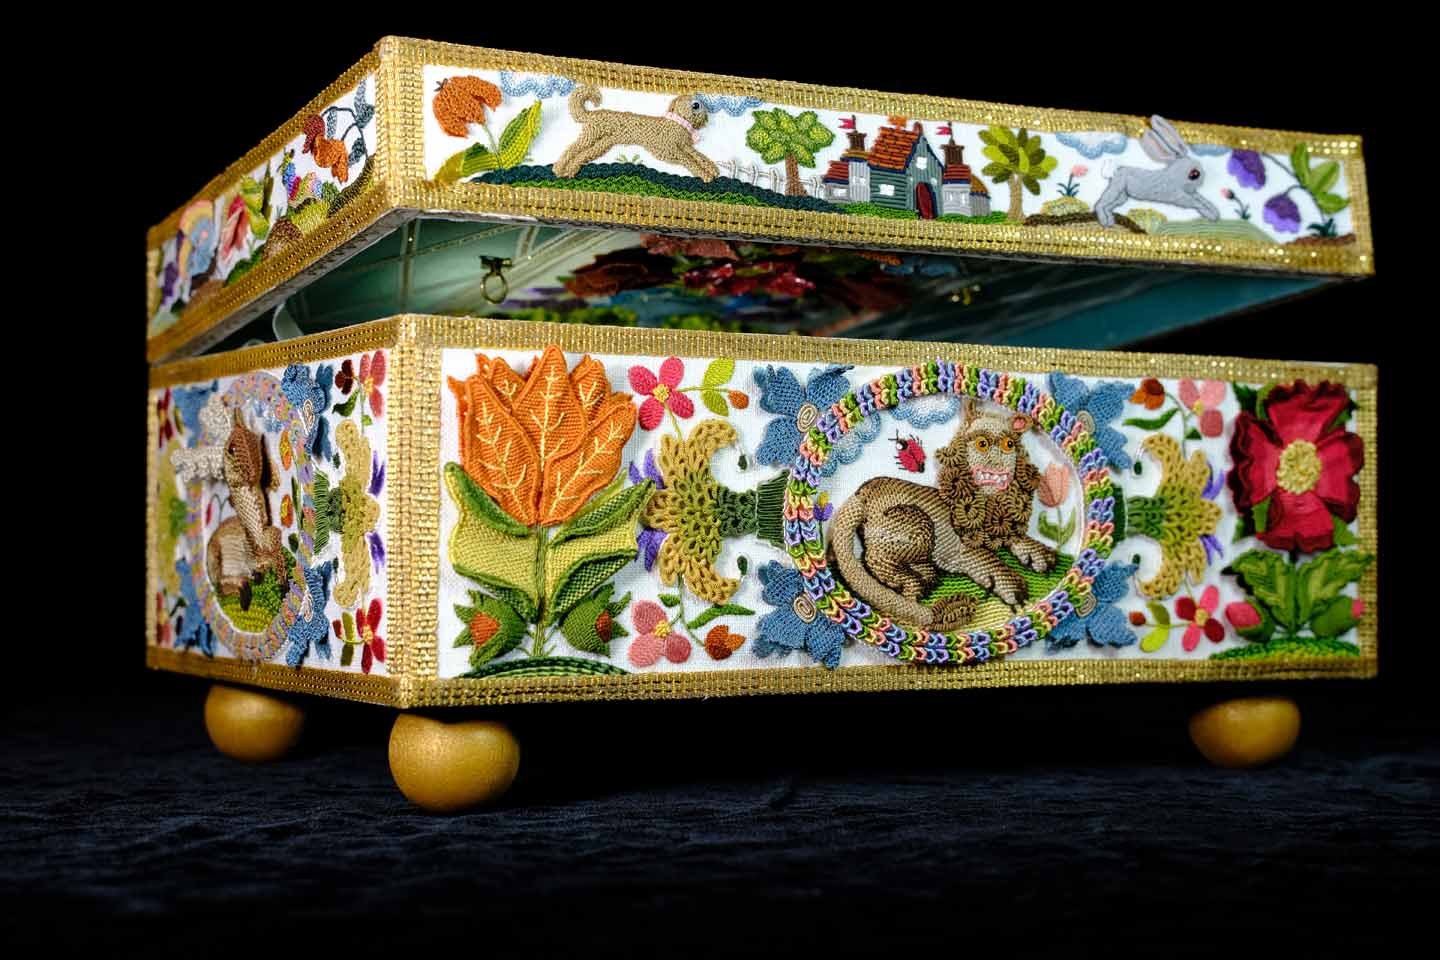 Harmony with Nature Casket